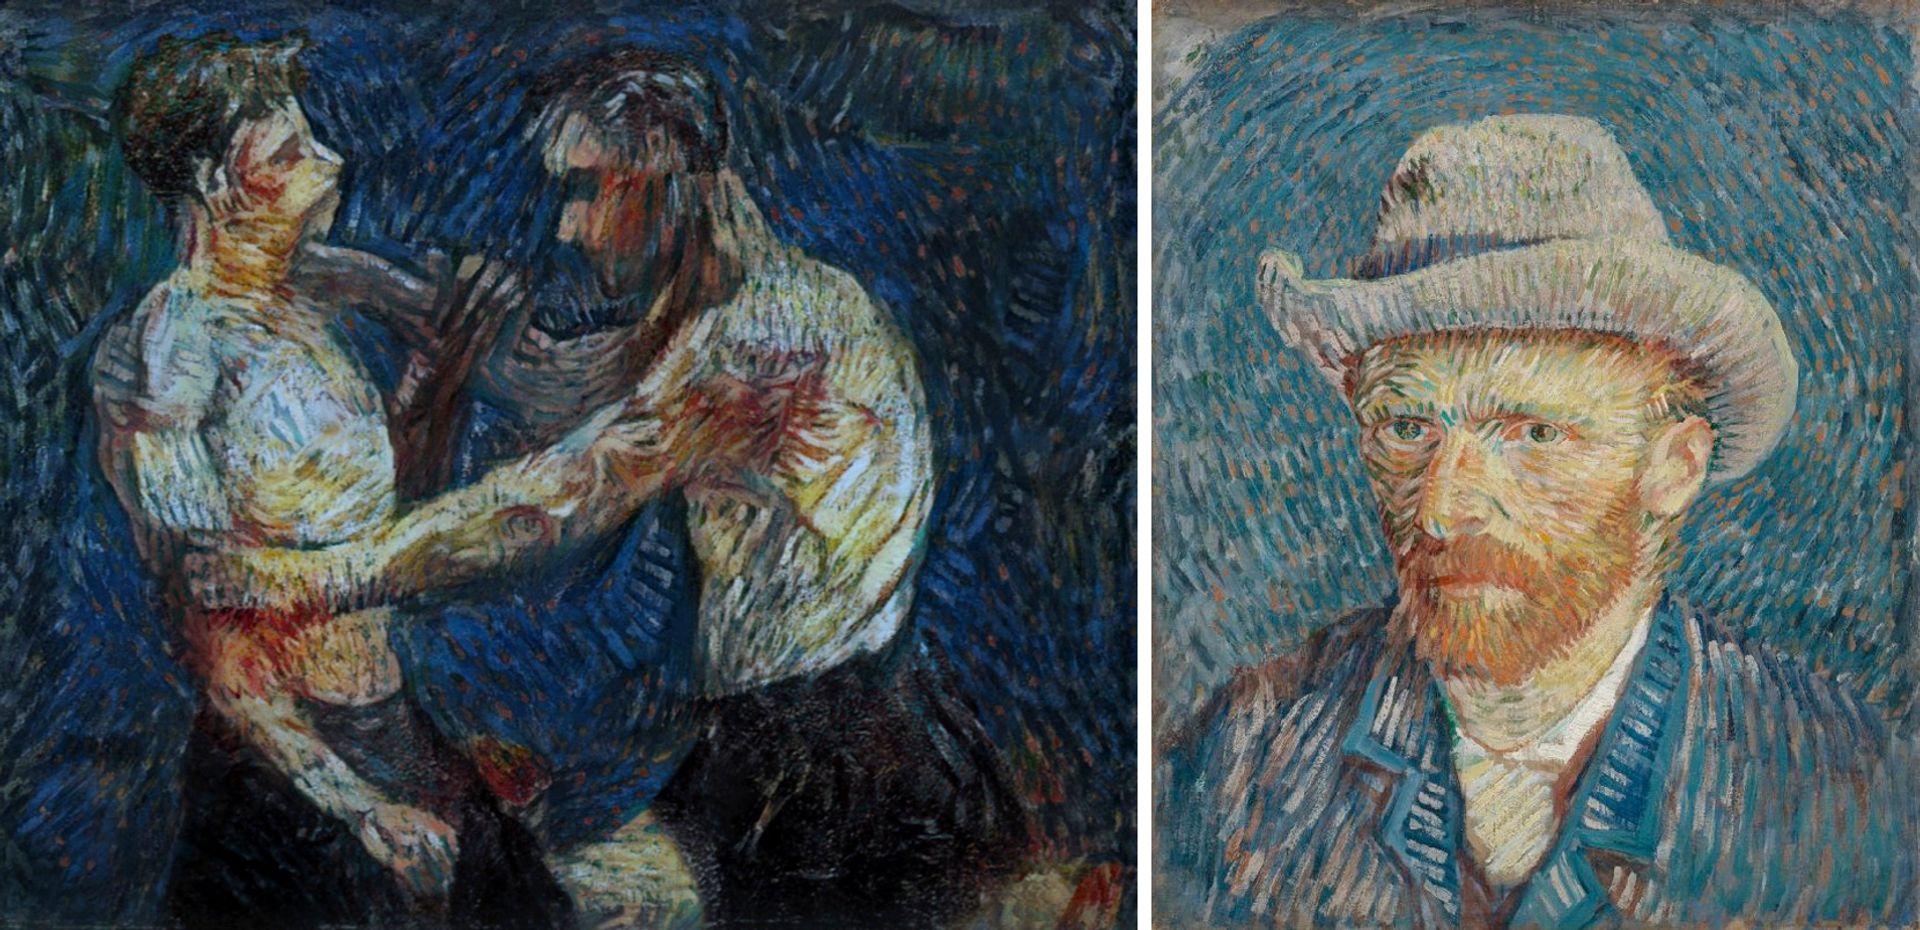 Van Gogh's Tumultuous Life Told Through His Paintings - 1000Museums